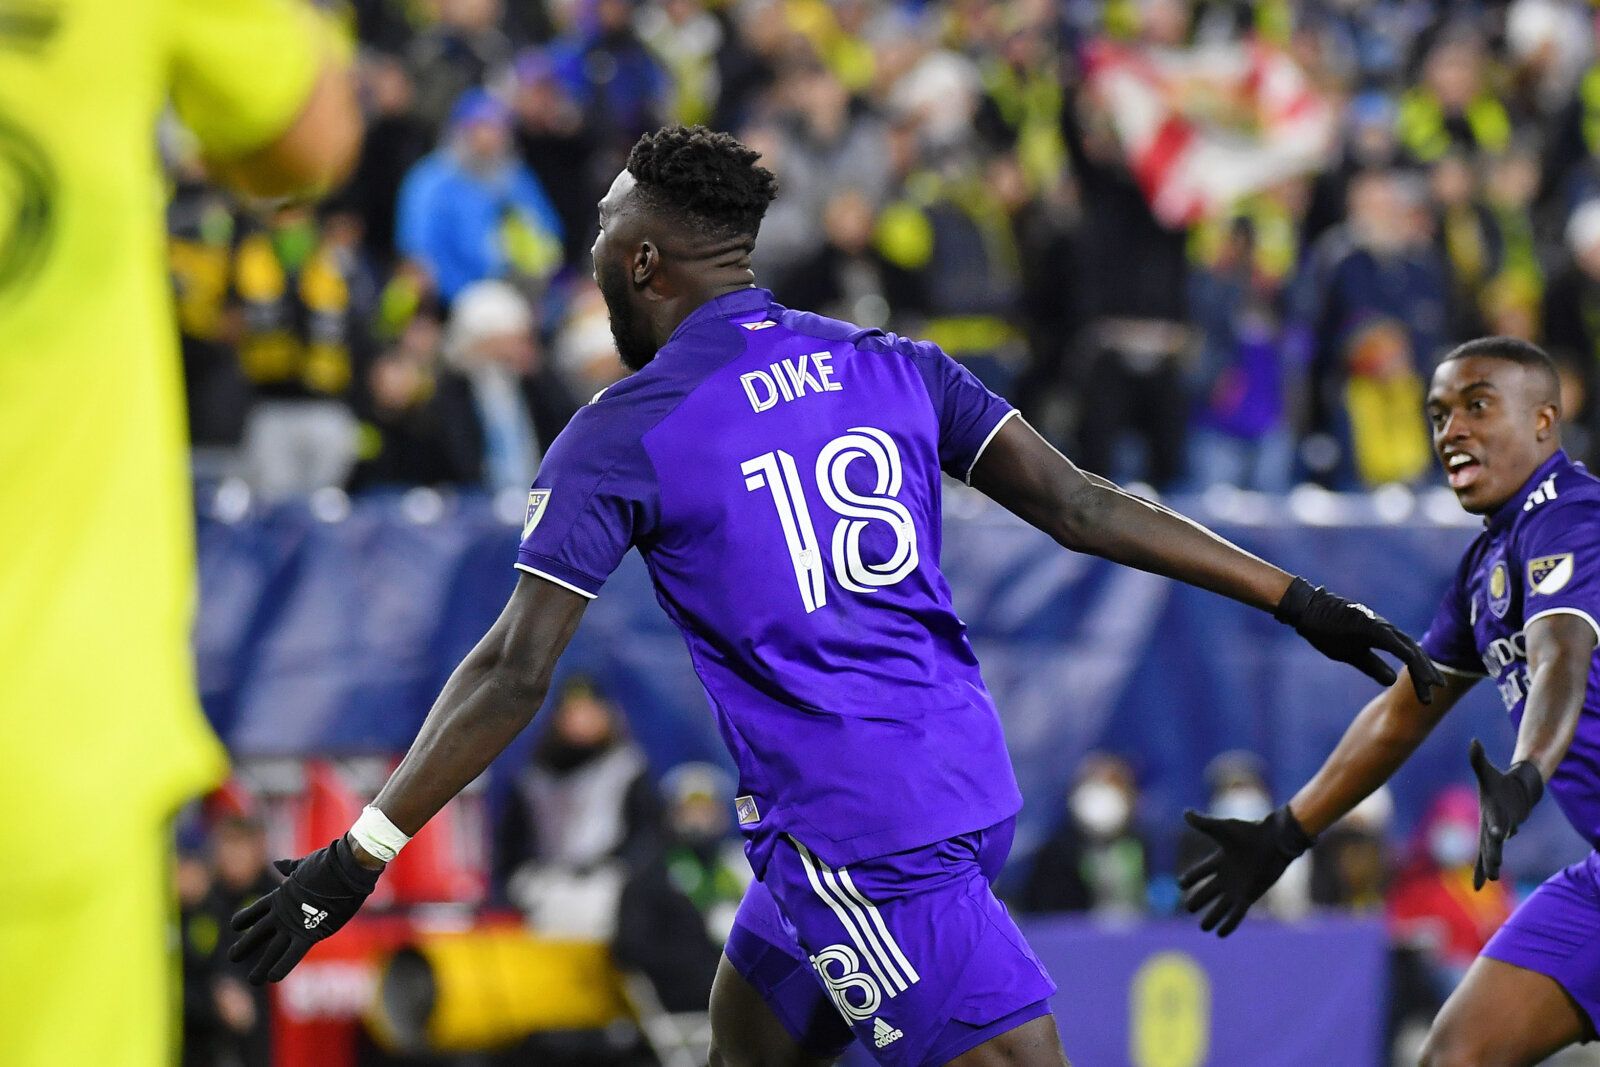 Nov 23, 2021; Nashville, TN, USA; Orlando City forward Daryl Dike (18) celebrates after scoring a goal against Nashville SC during the first half of a round one MLS Playoff game at Nissan Stadium. Mandatory Credit: Christopher Hanewinckel-USA TODAY Sports